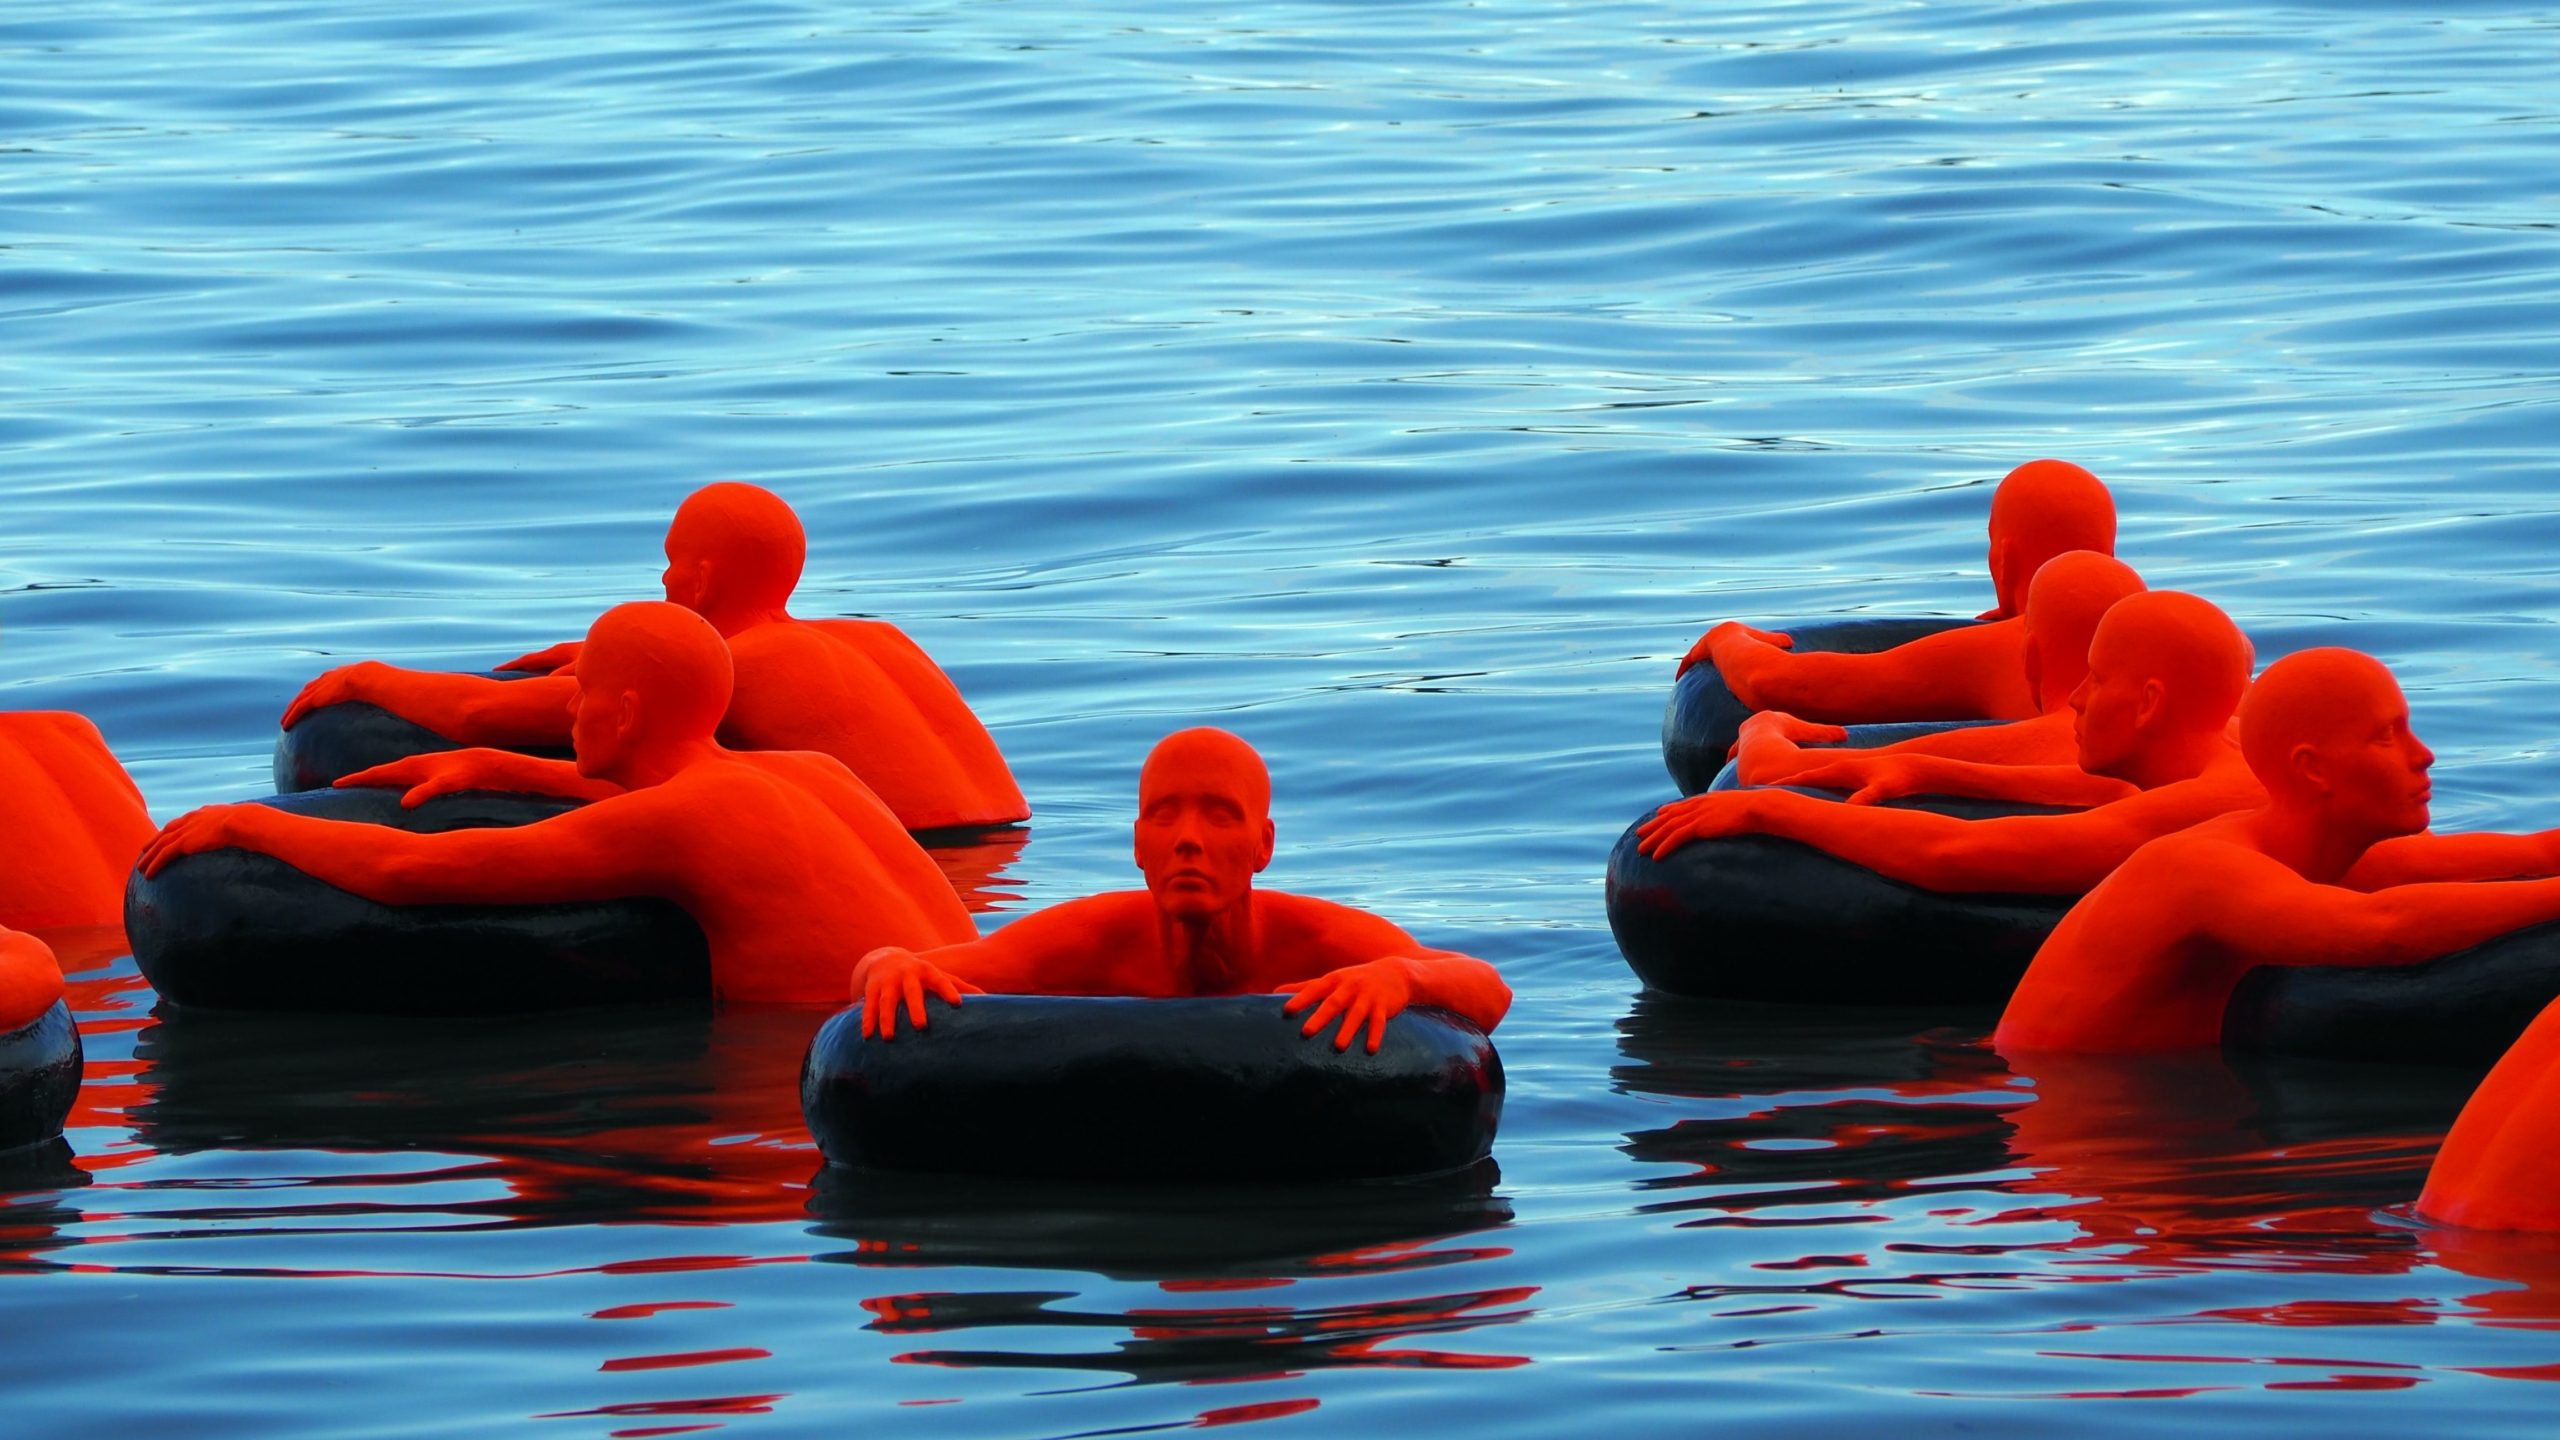 Photo of statues that represent refugees trying to stay afloat in water